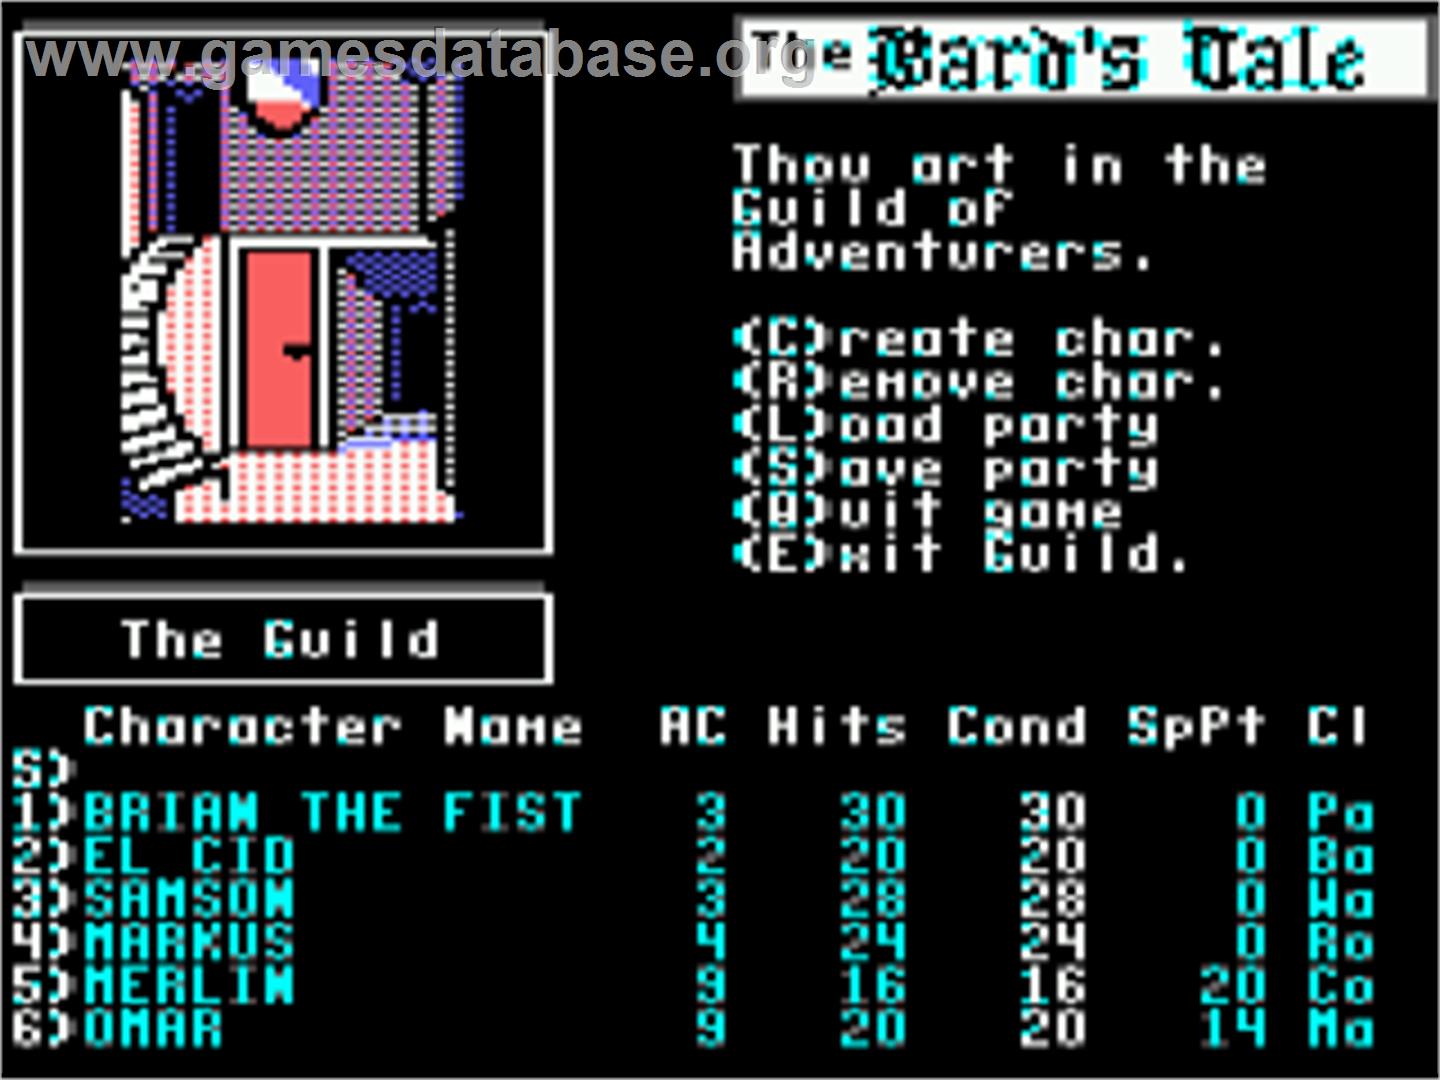 Tales of the Unknown, Volume I: The Bard's Tale - Amstrad CPC - Artwork - In Game